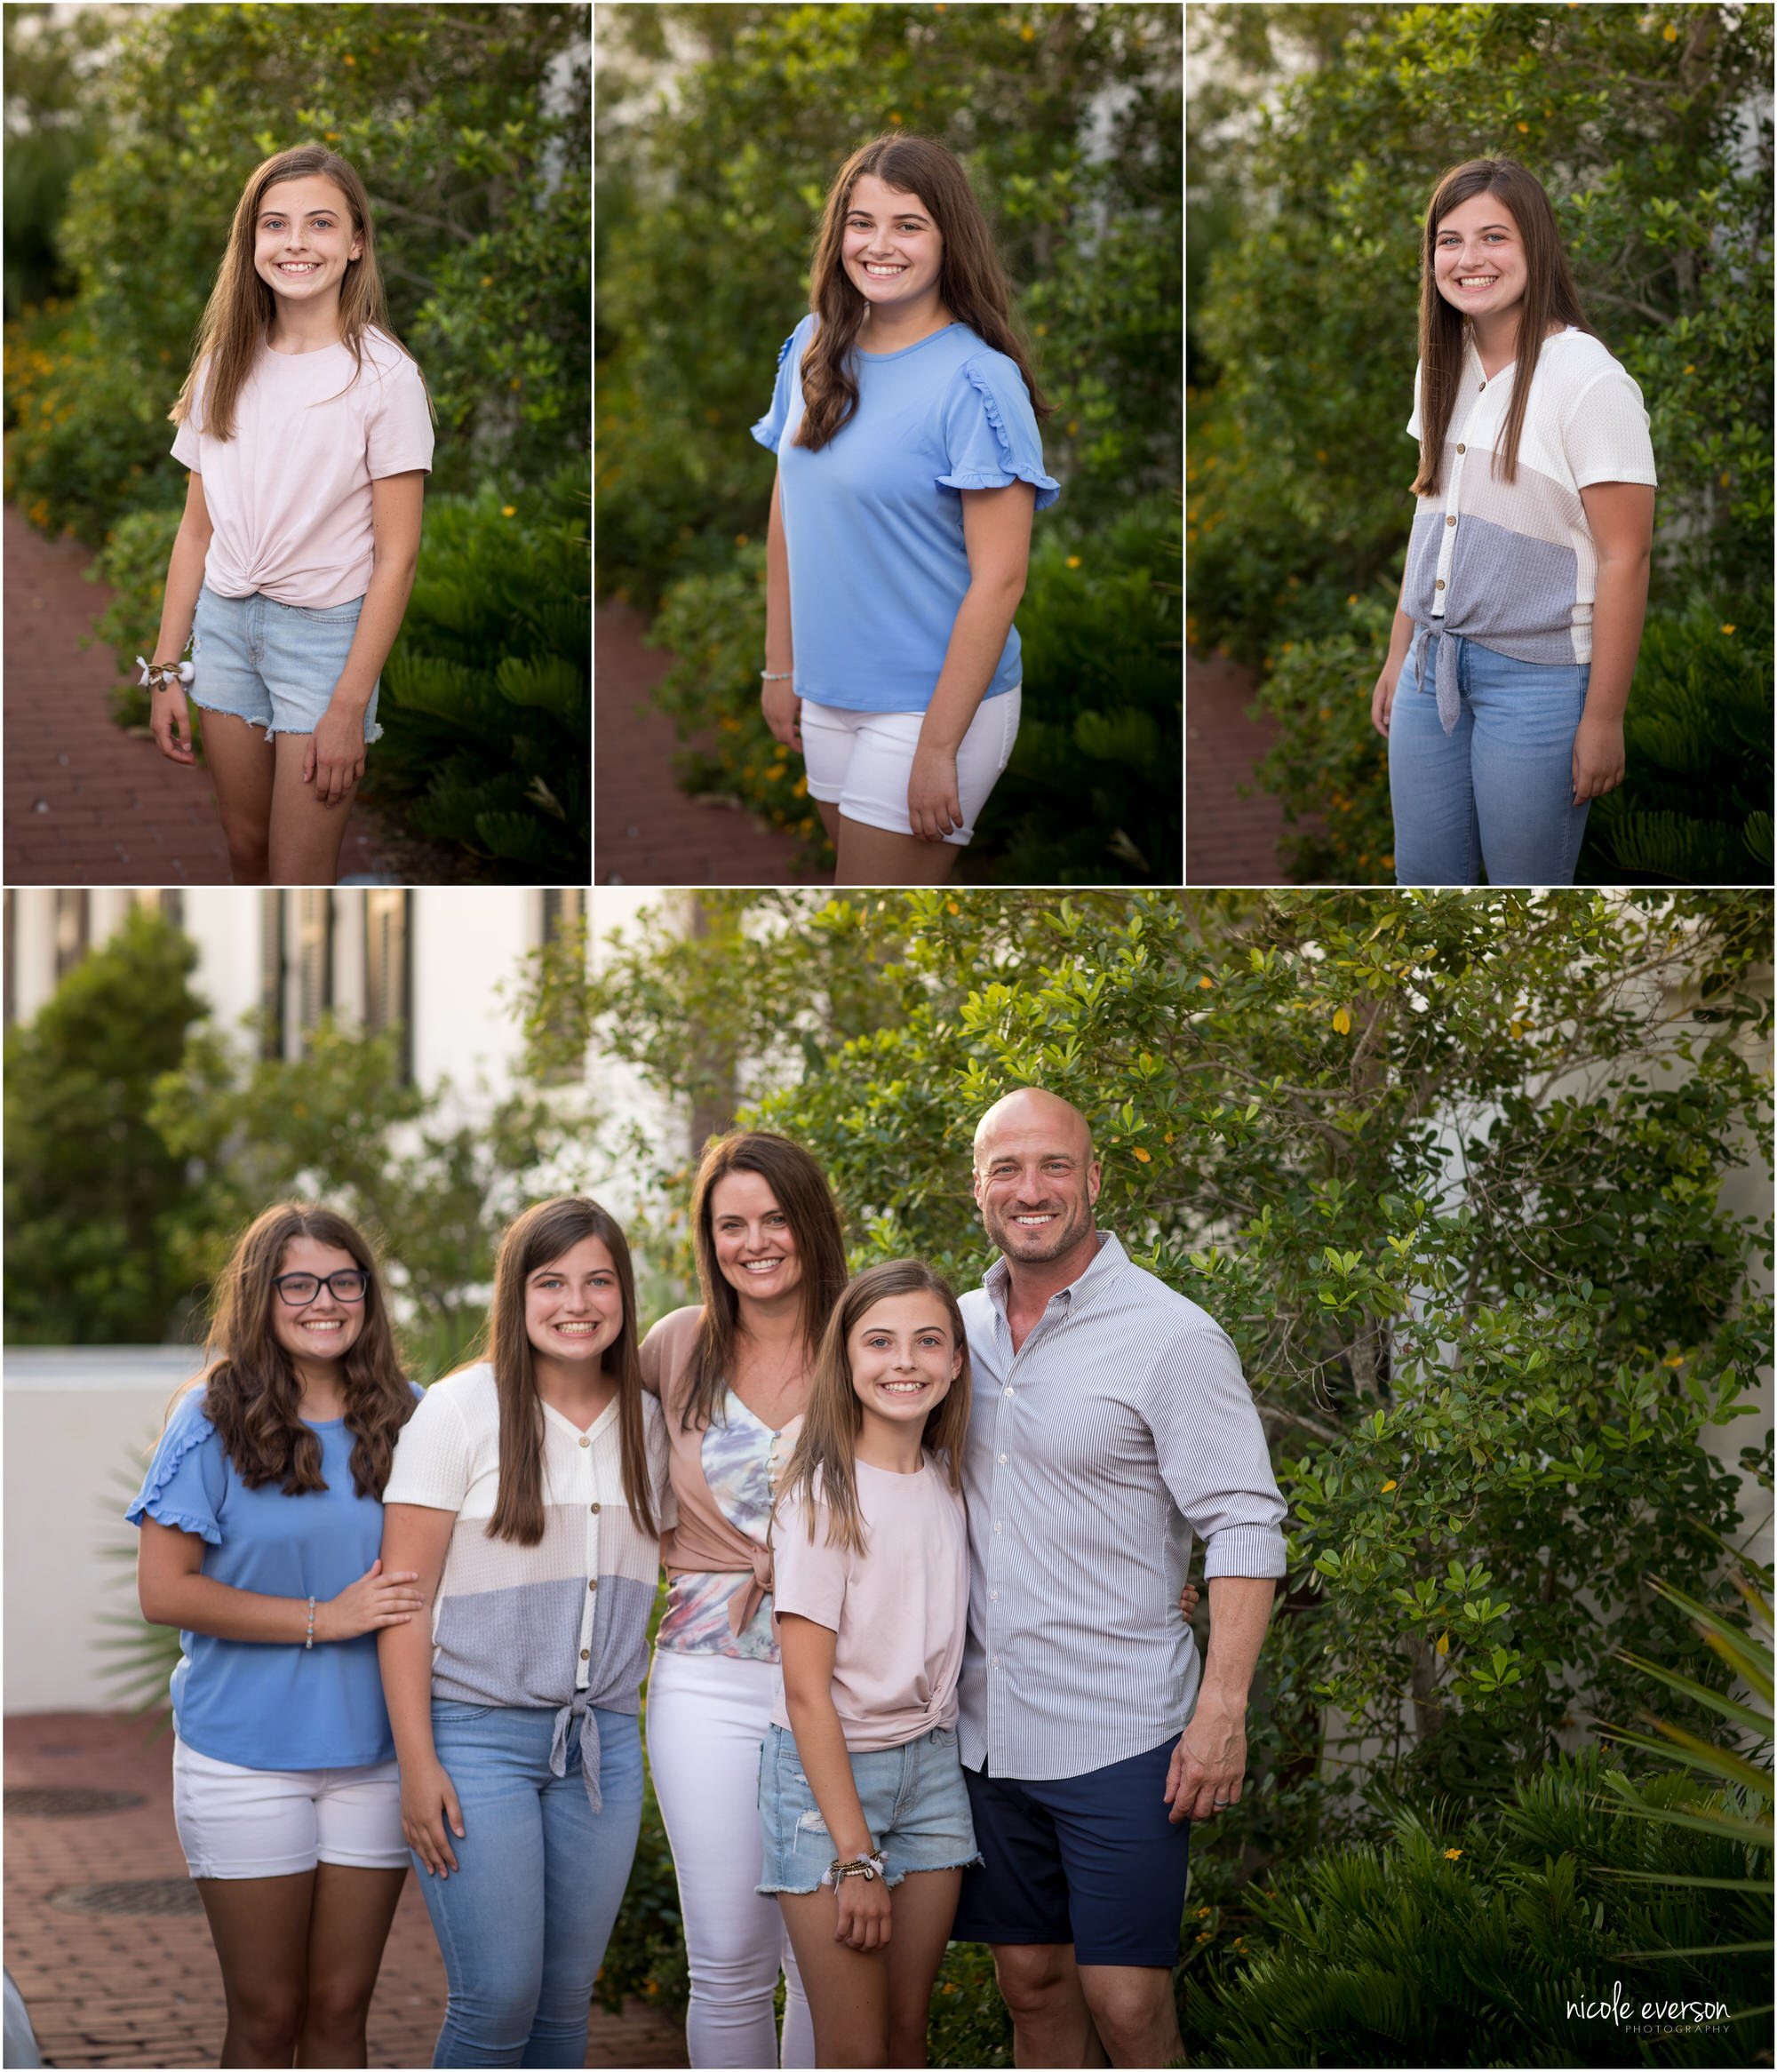 fun family photography with Nicole Everson Photography